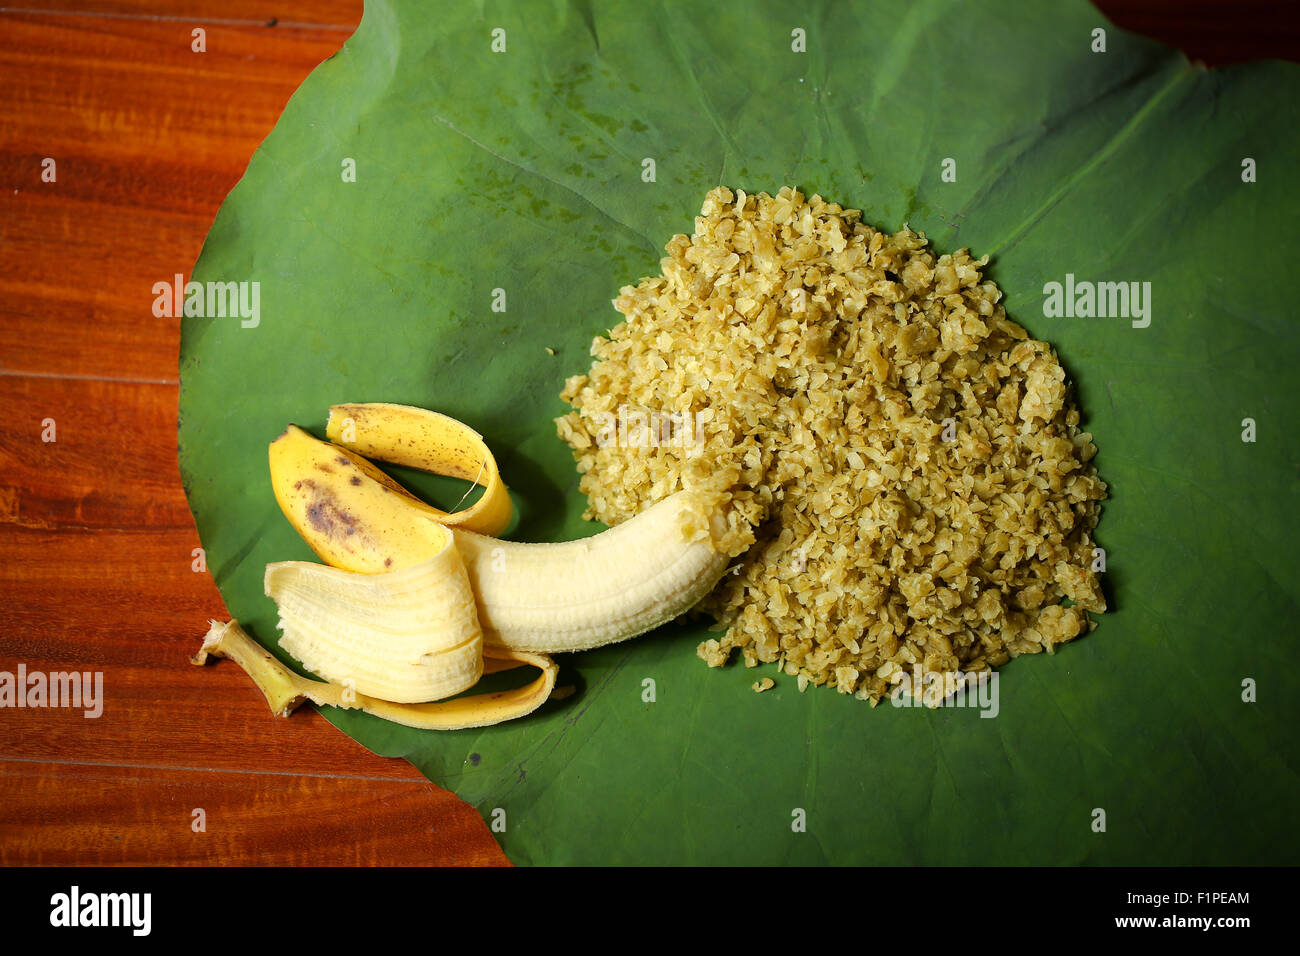 A portion of green rice or young rice, a traditional cuisine of Vietnam Stock Photo